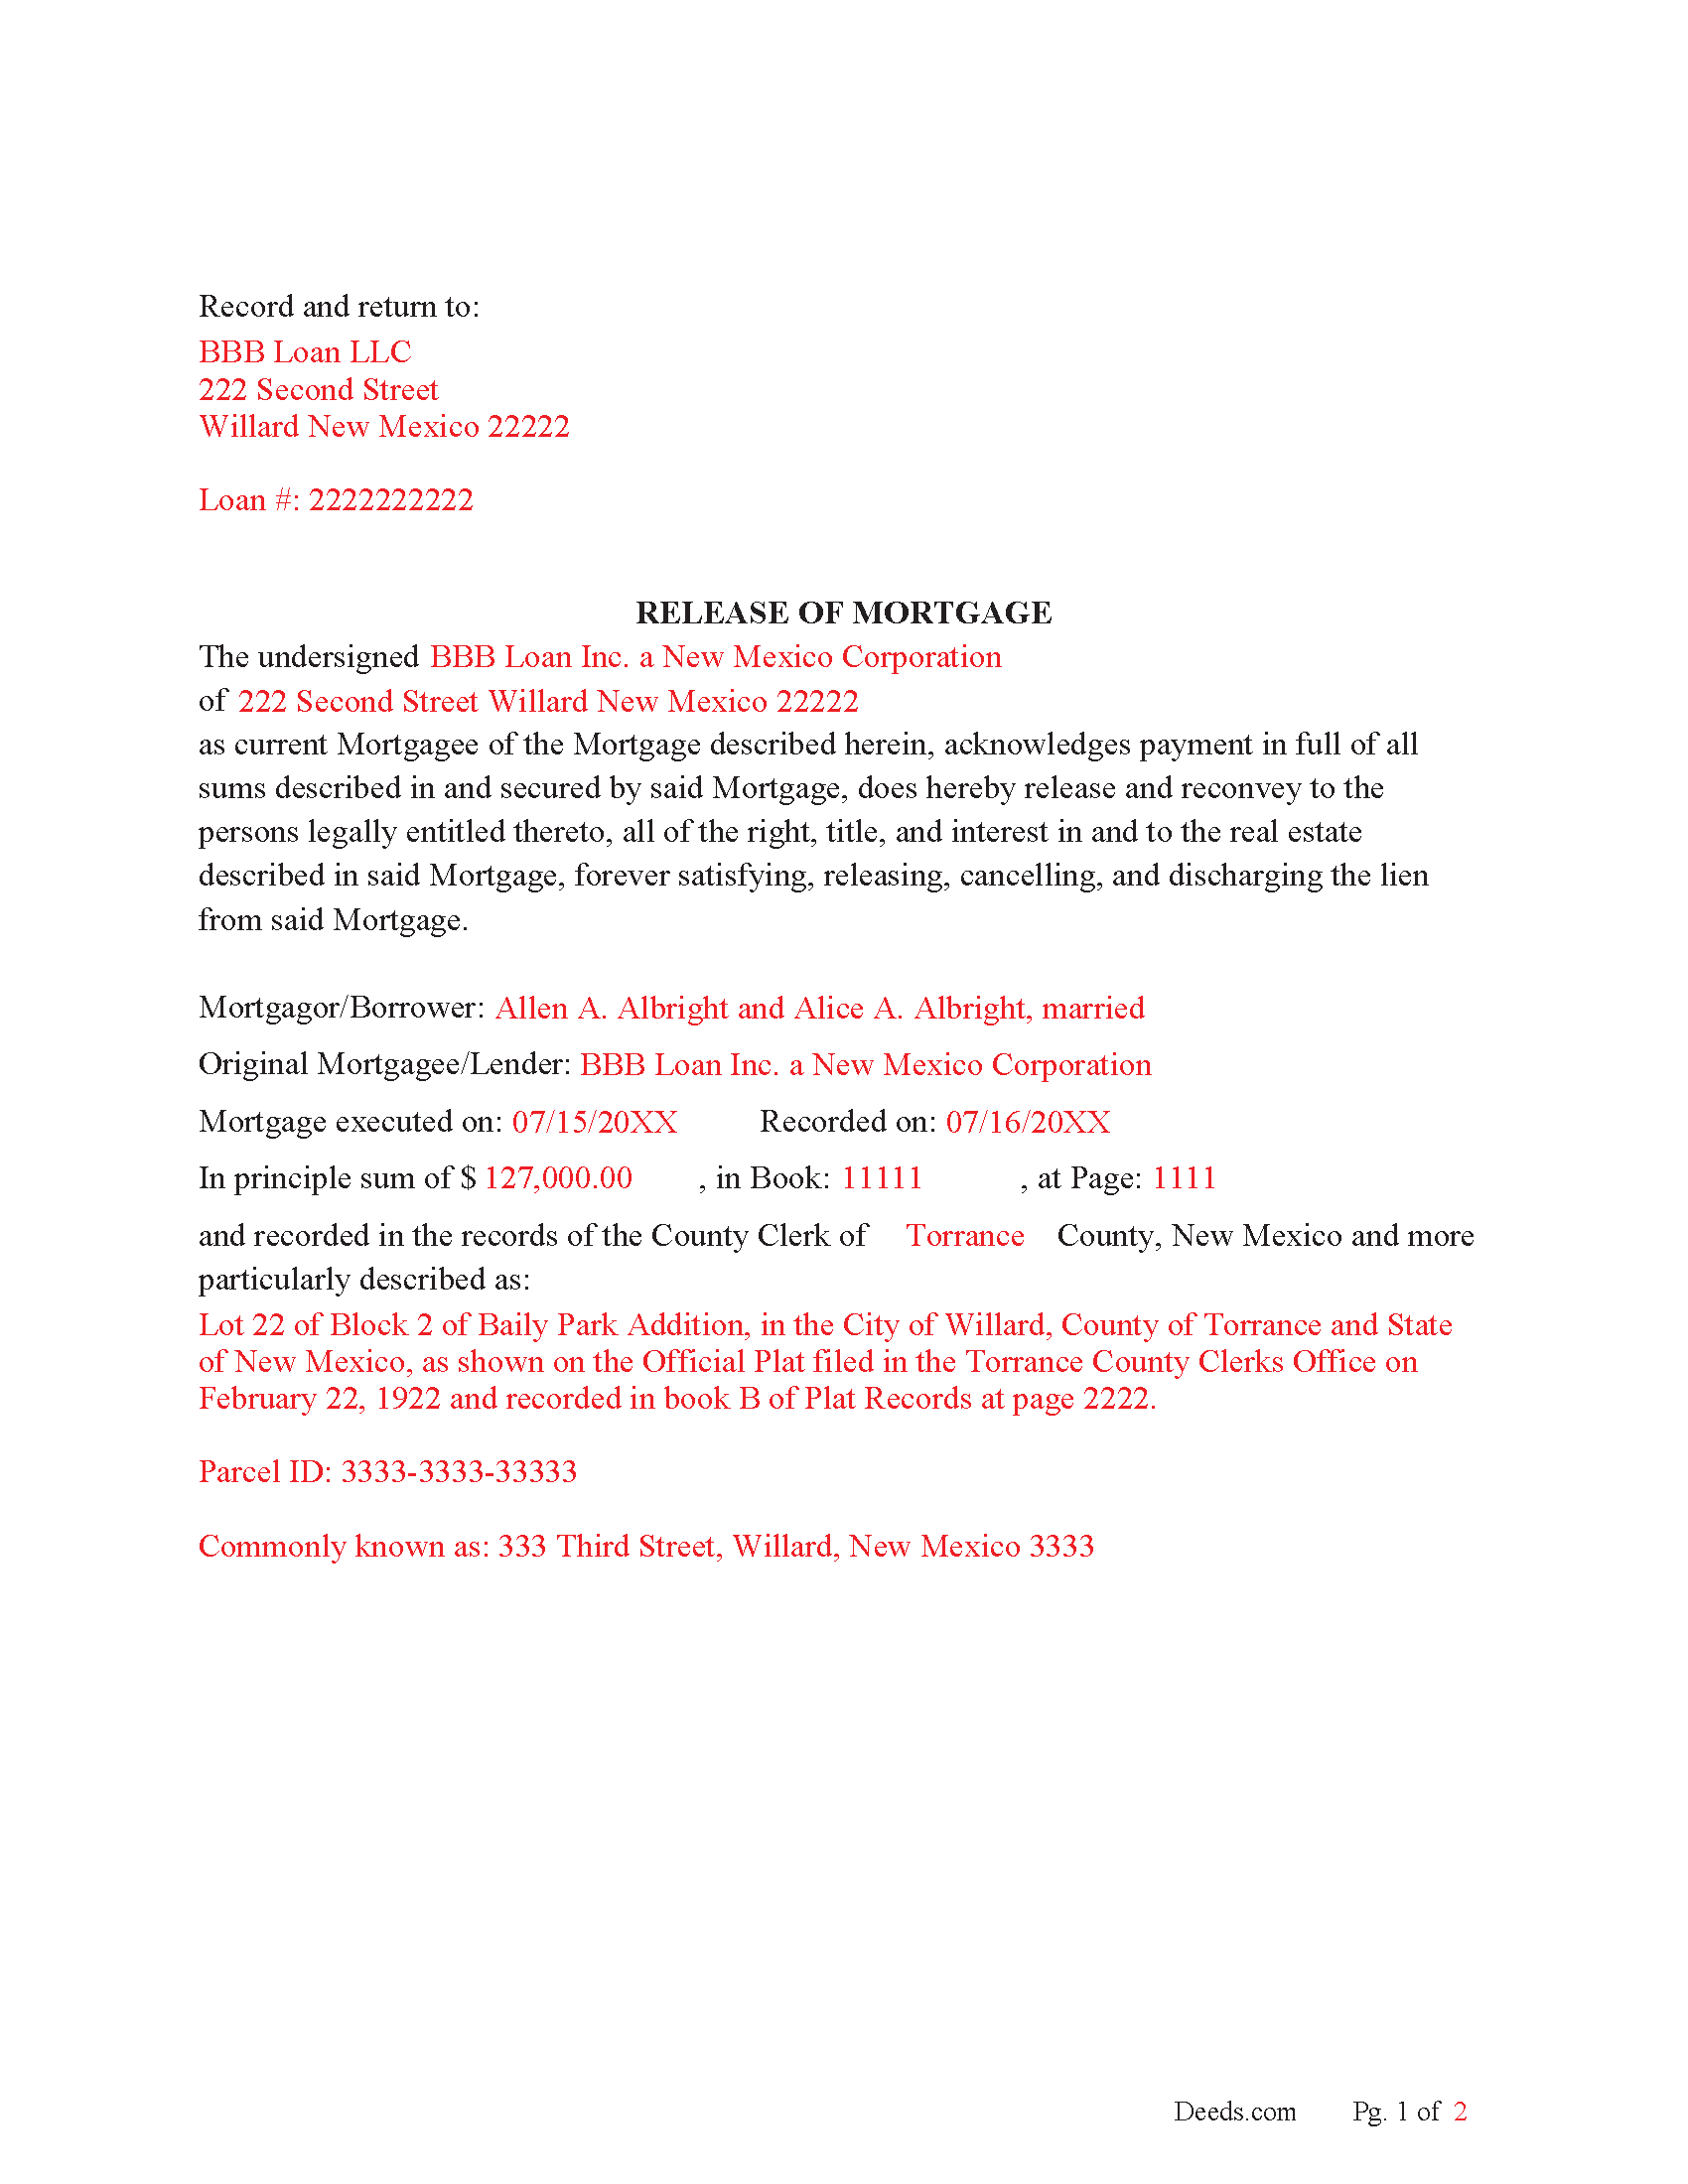 Completed Example of the Release of Mortgage Document